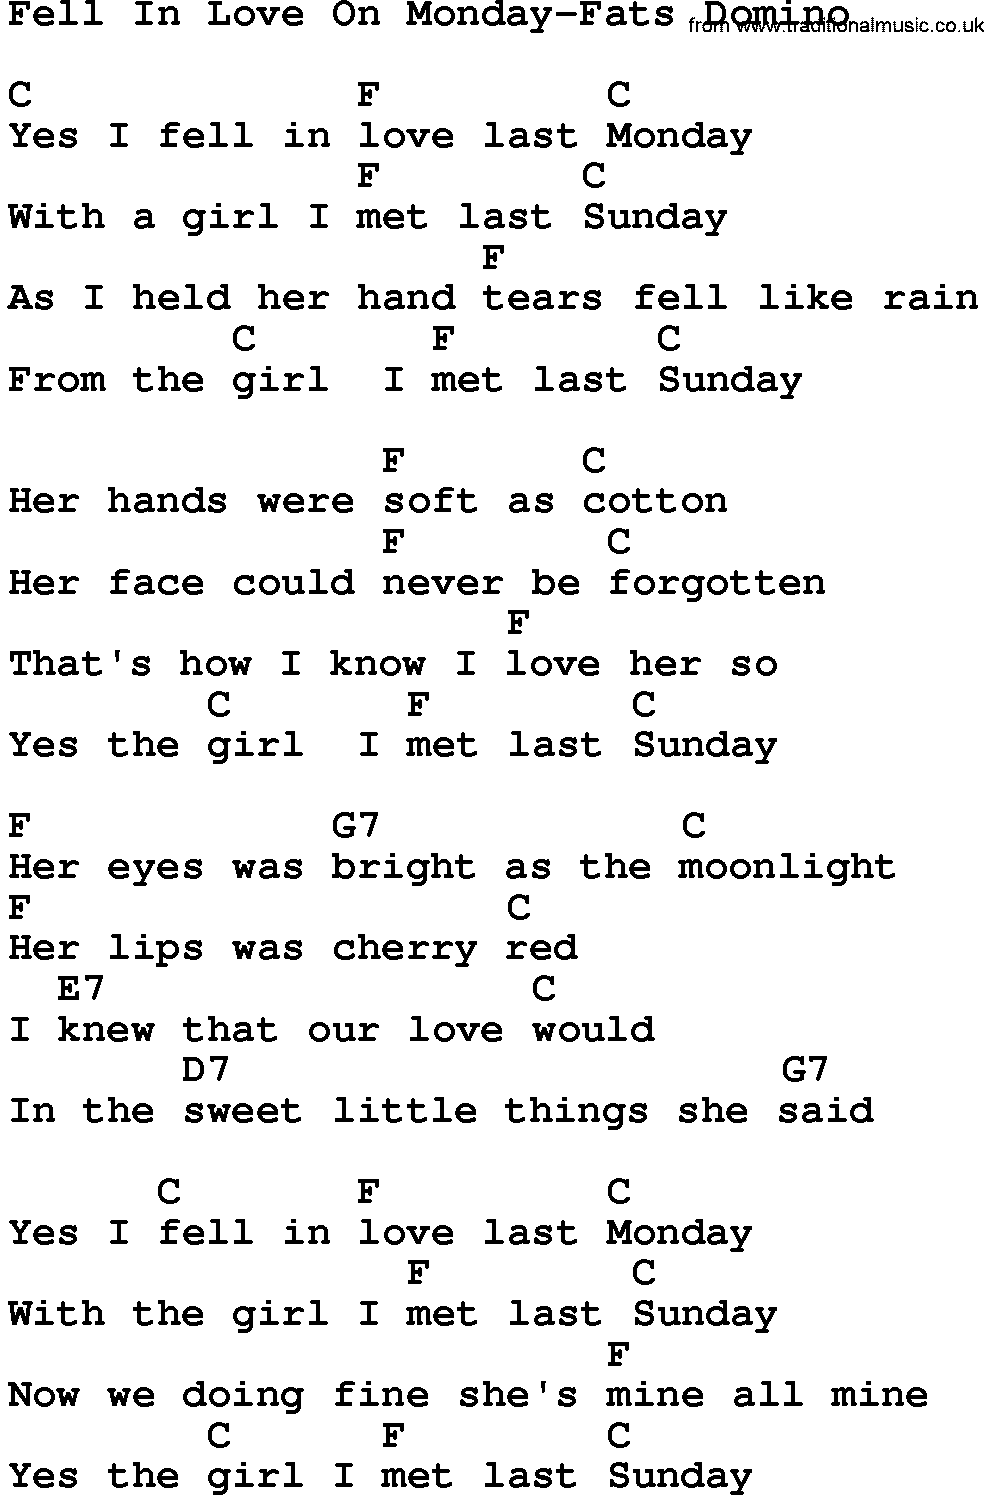 Country music song: Fell In Love On Monday-Fats Domino lyrics and chords